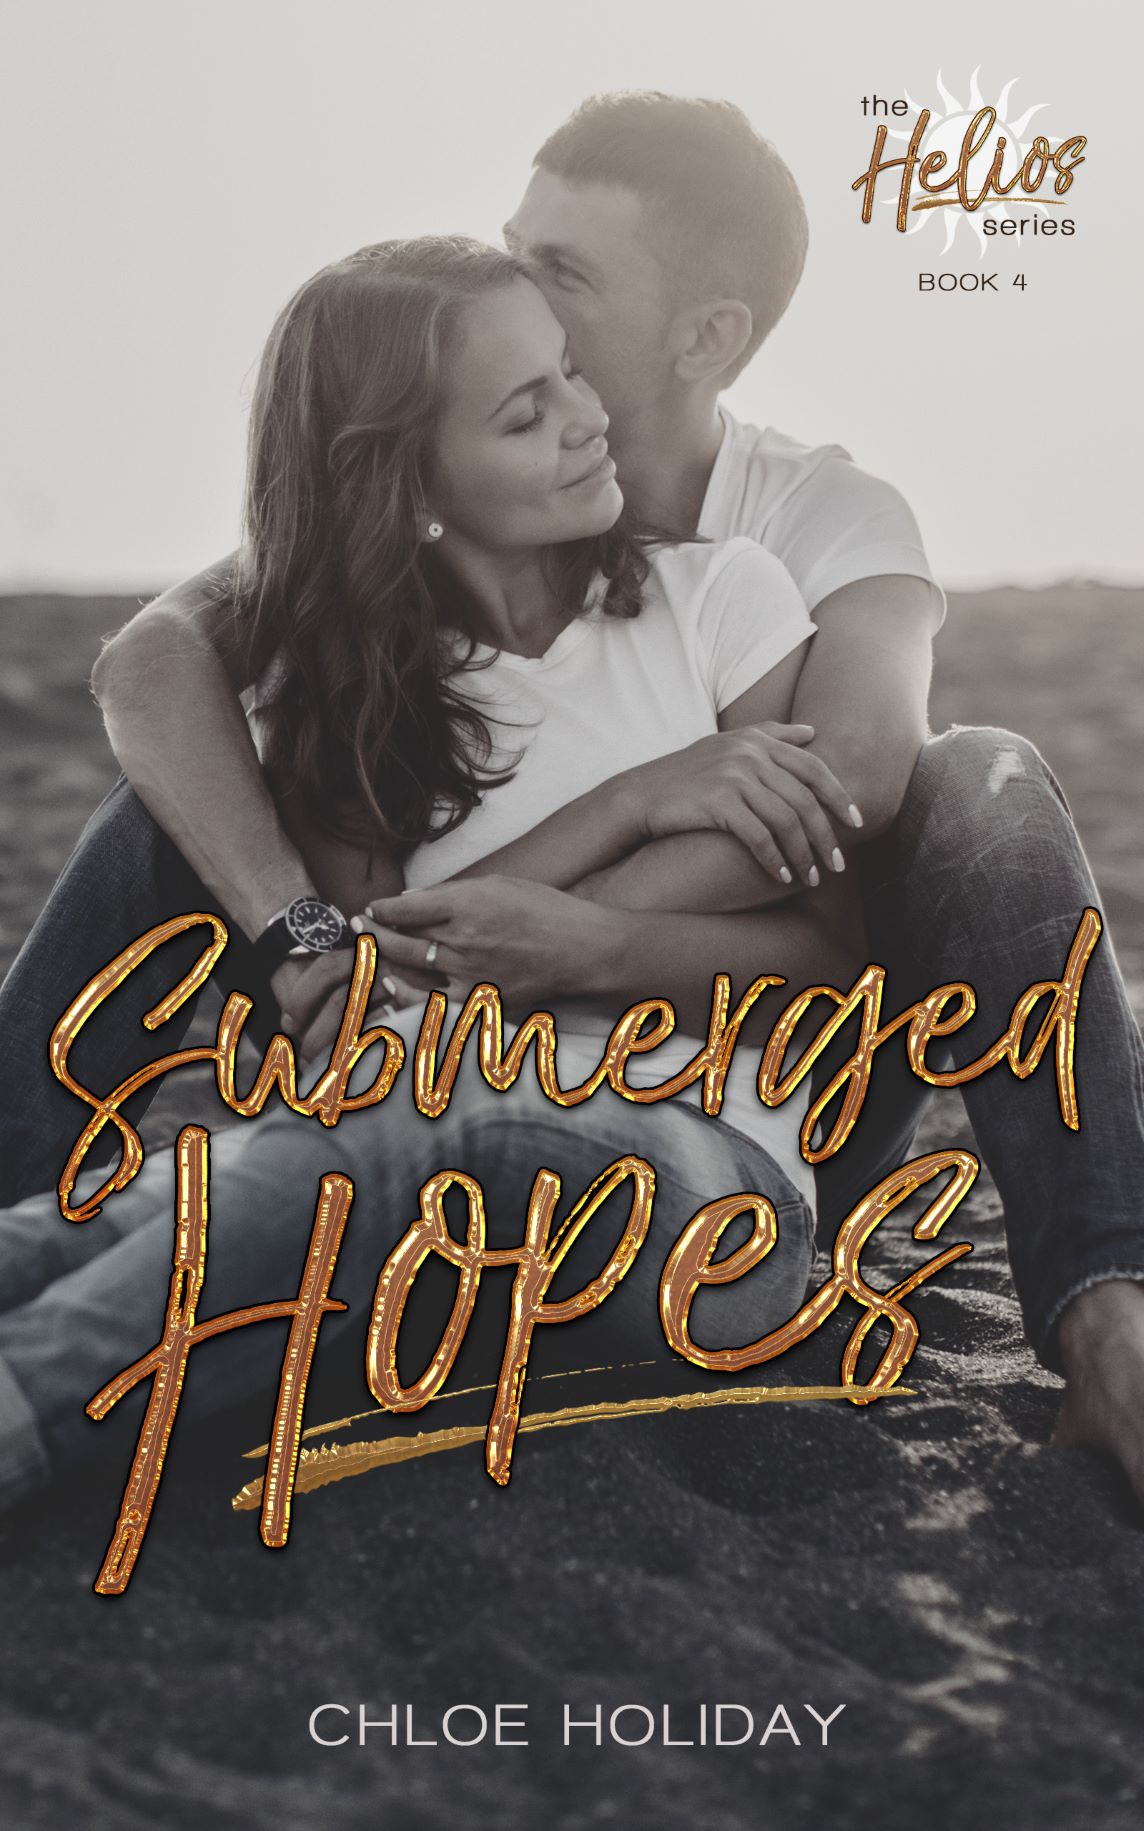 Submerged Hopes, a standalone novel in The Helios Series by Chloe Holiday, is on sale as a Kindle Countdown deal.